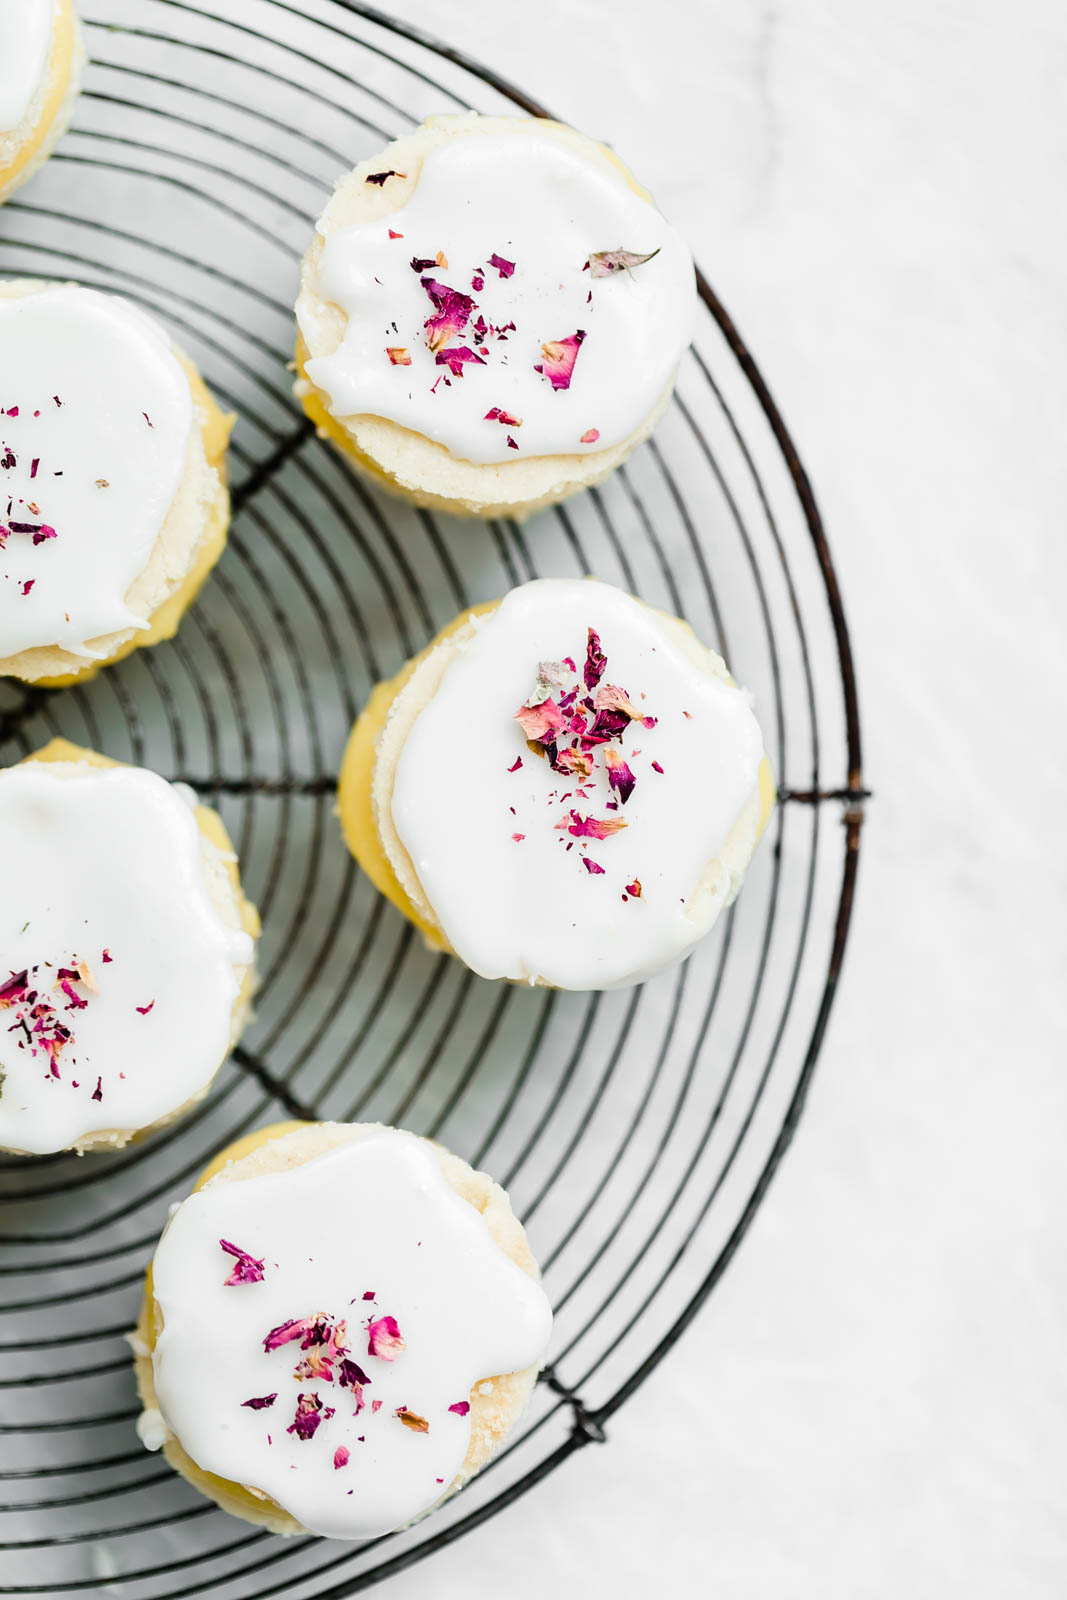 Coconut Lemon Curd Petit Fours: homemade lemon curd sandwiched between two coconut flour cakes and topped with lemon icing. HELLO SPRING!